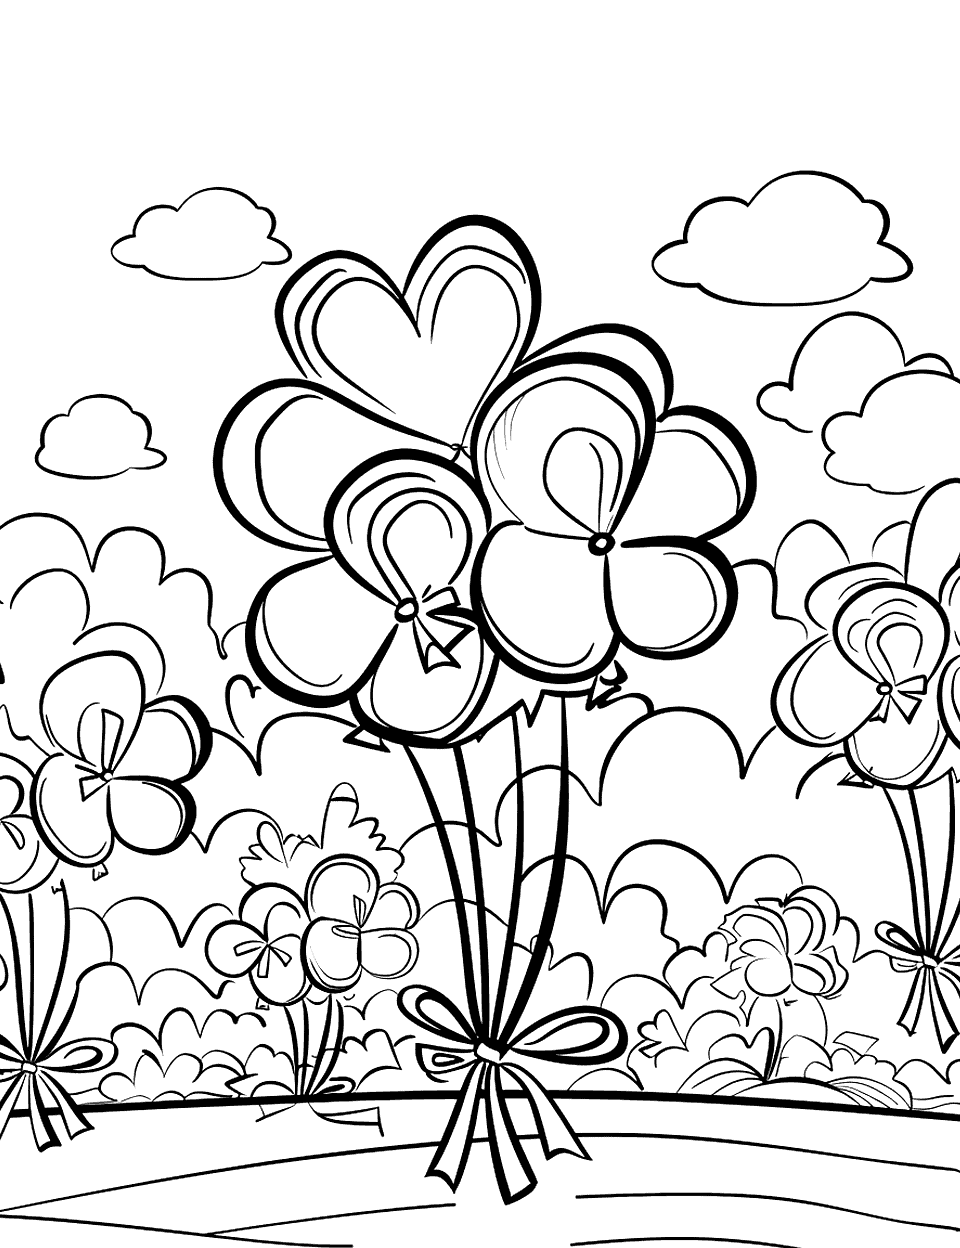 Shamrock Shaped Balloons at a Fair Coloring Page - A festive scene at a local fair with balloons shaped like shamrocks floating in the air.